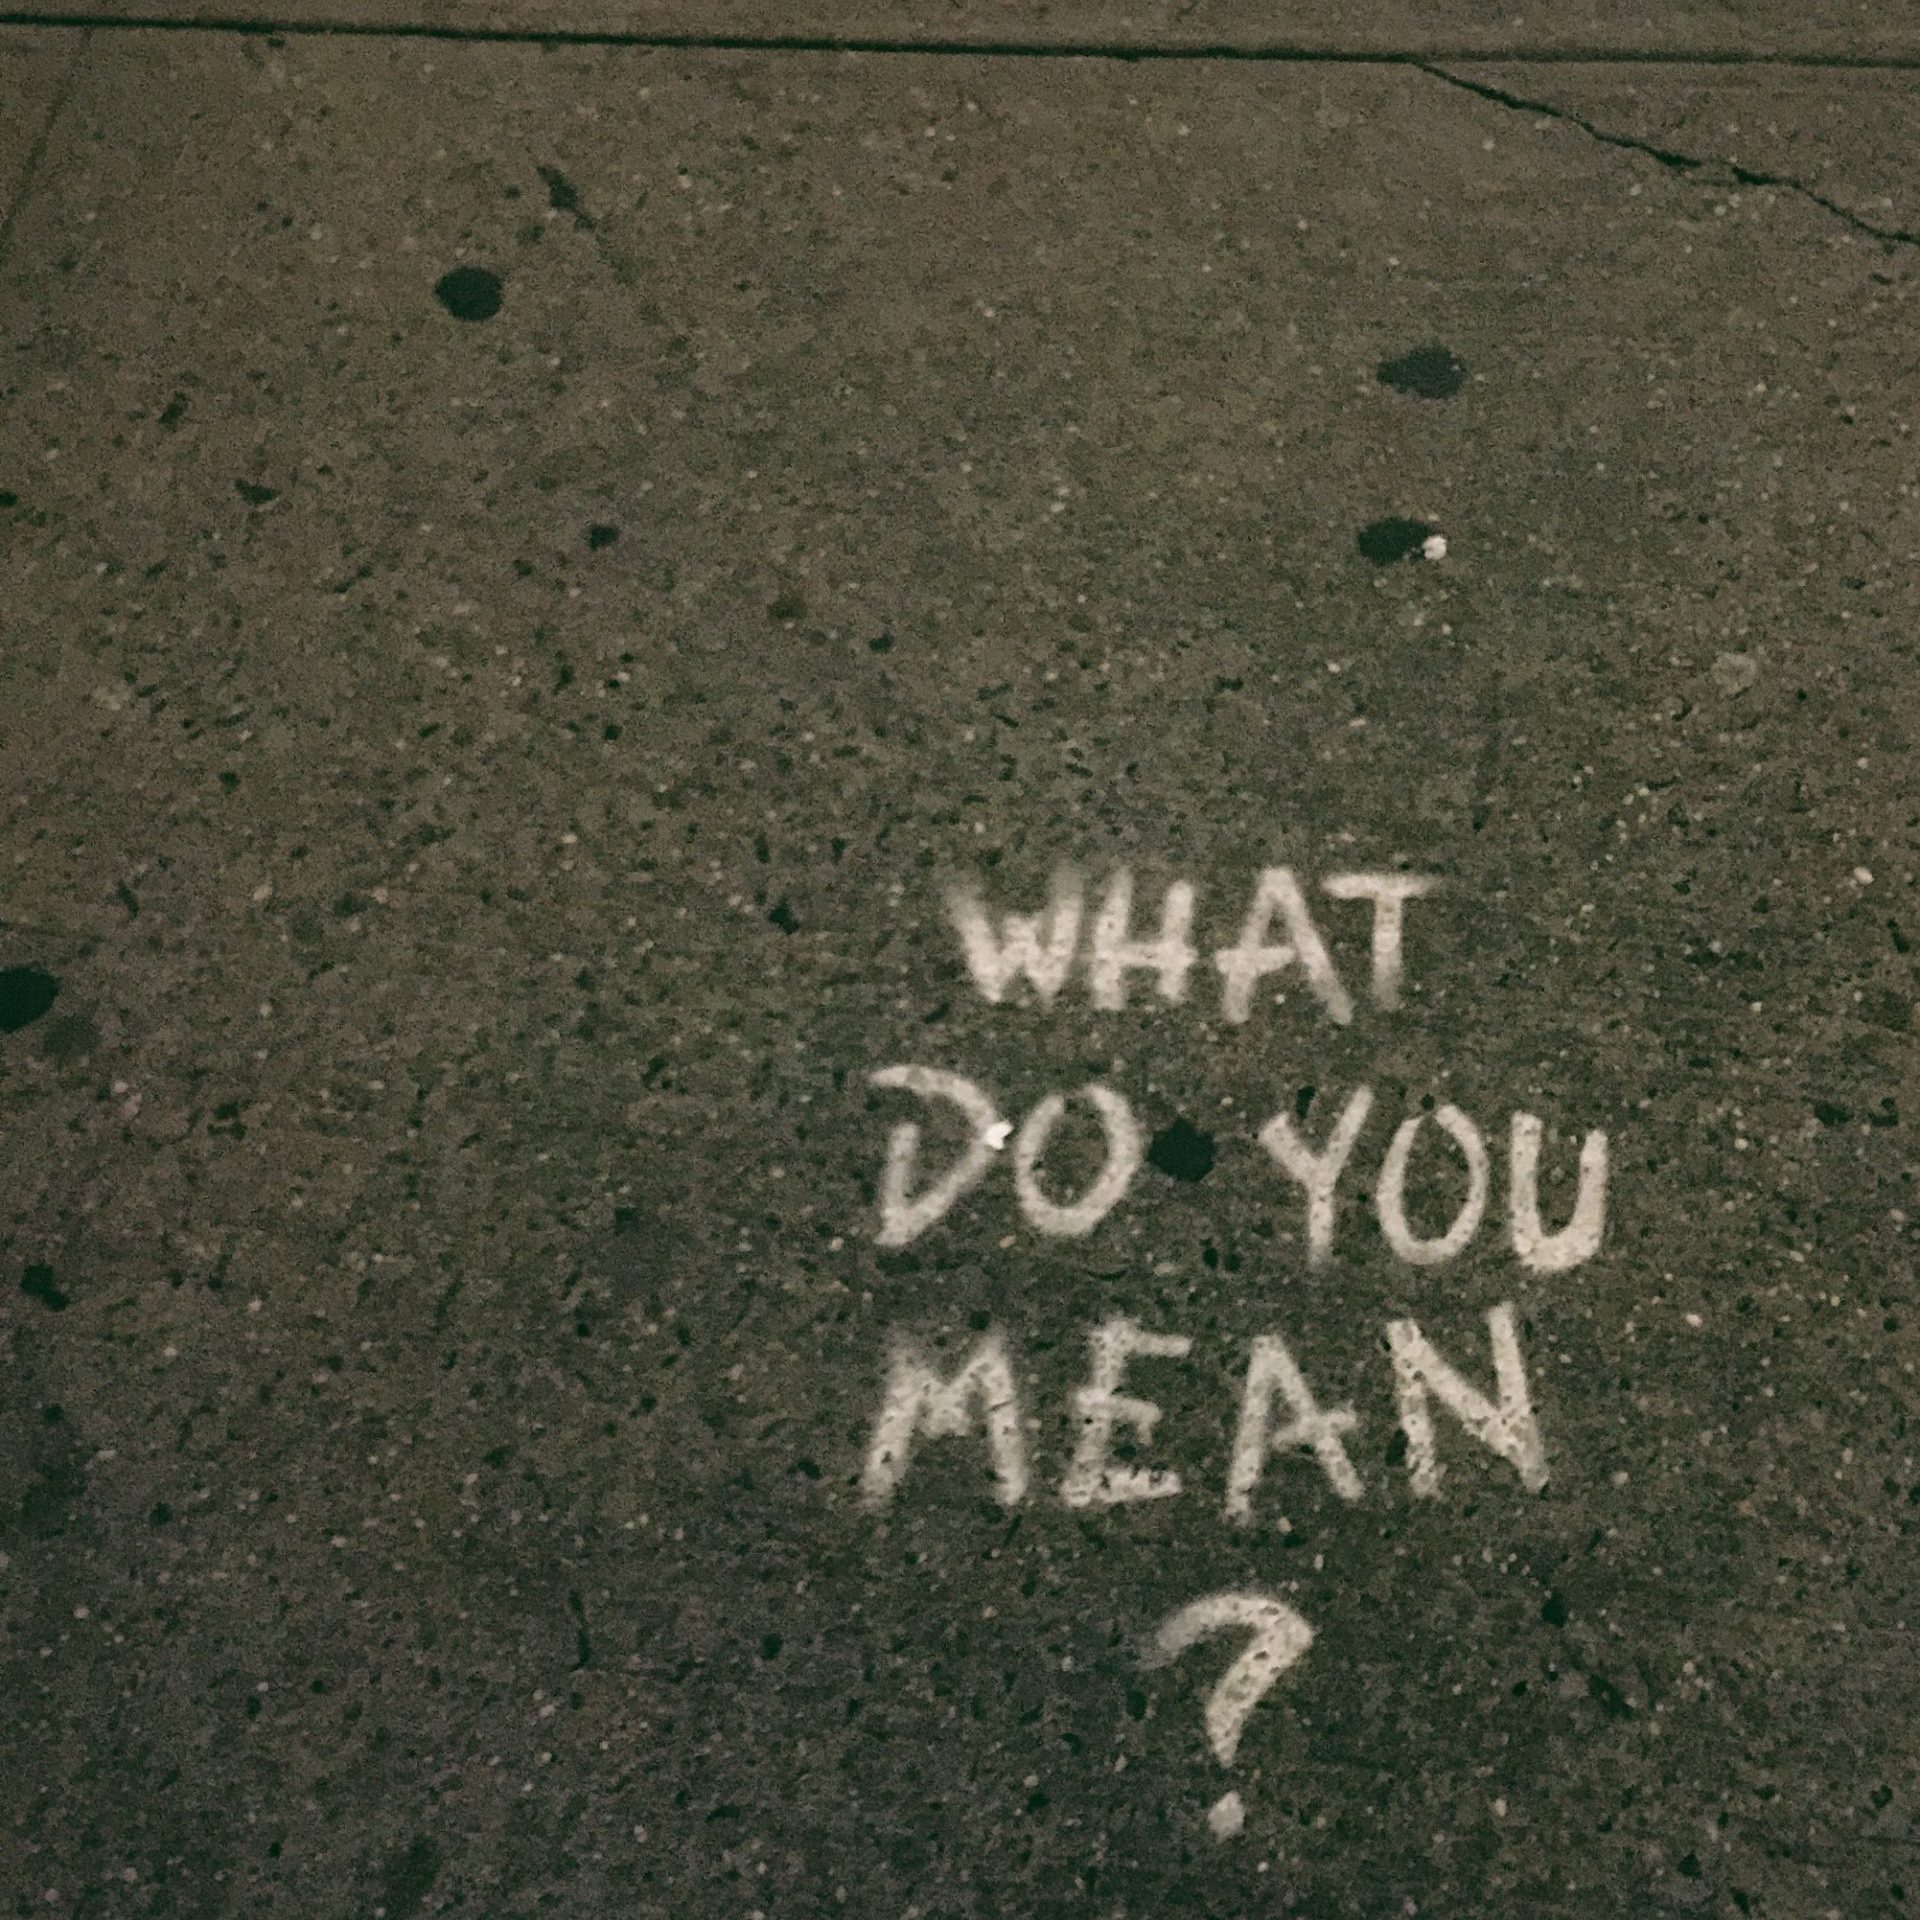 words spray painted on the floor reading 'what do you mean?'